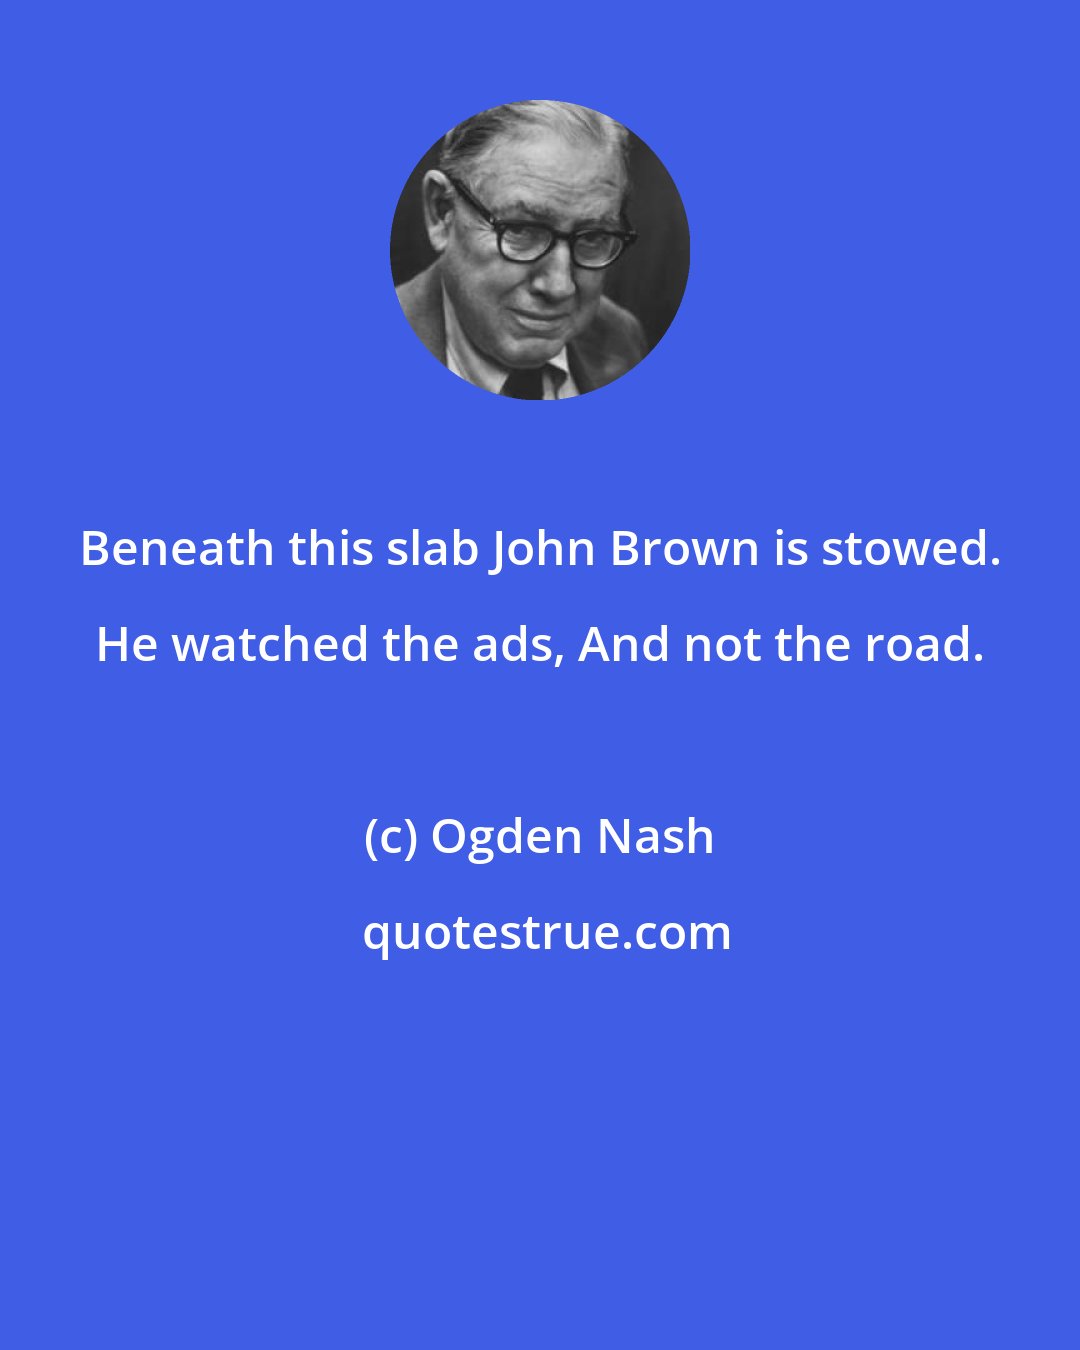 Ogden Nash: Beneath this slab John Brown is stowed. He watched the ads, And not the road.